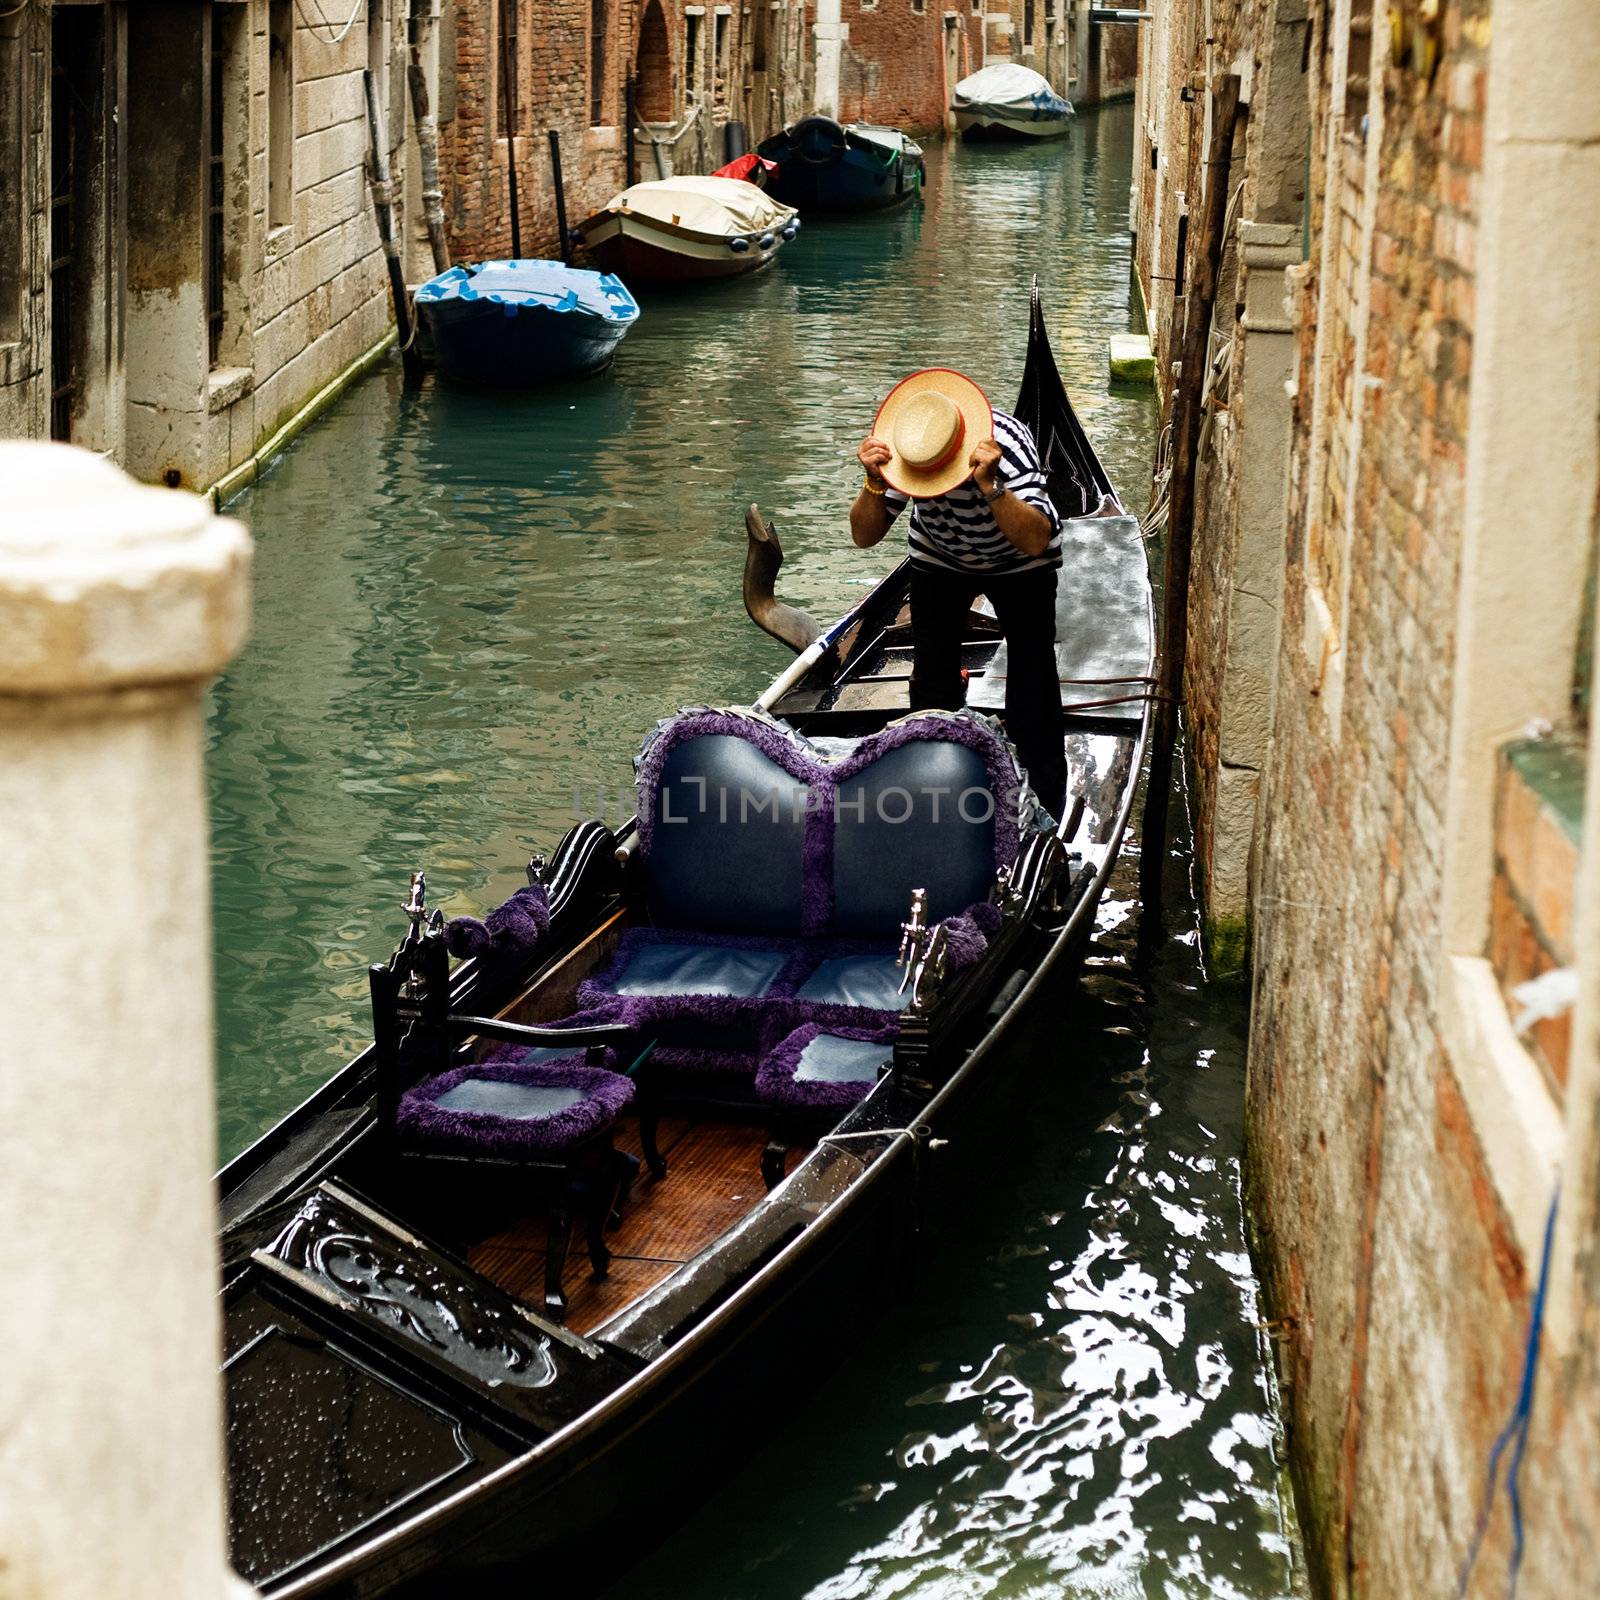 An image of a gondola  in a narrow canal